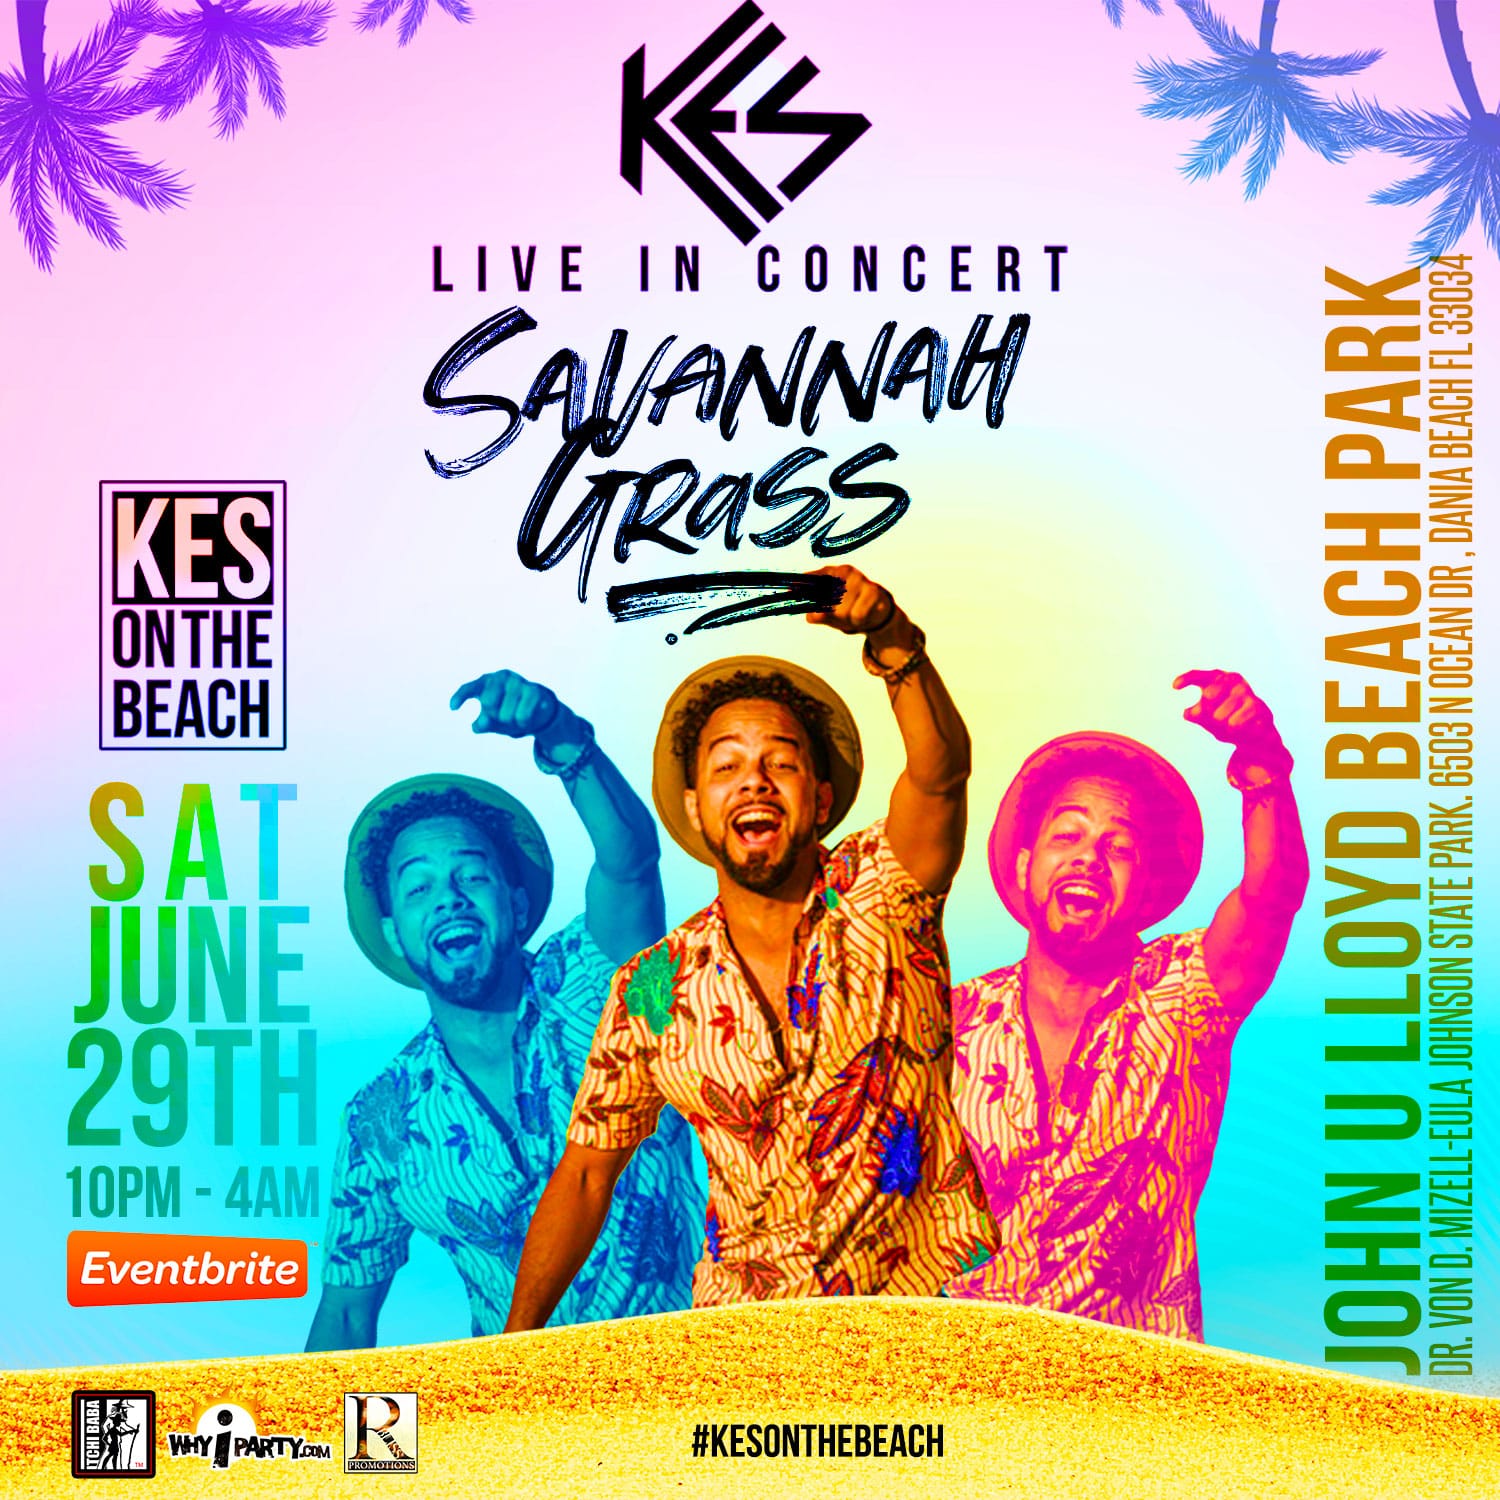 KES THE BAND LIVE IN CONCERT KESontheBeach “Savannah Grass” WhyiParty